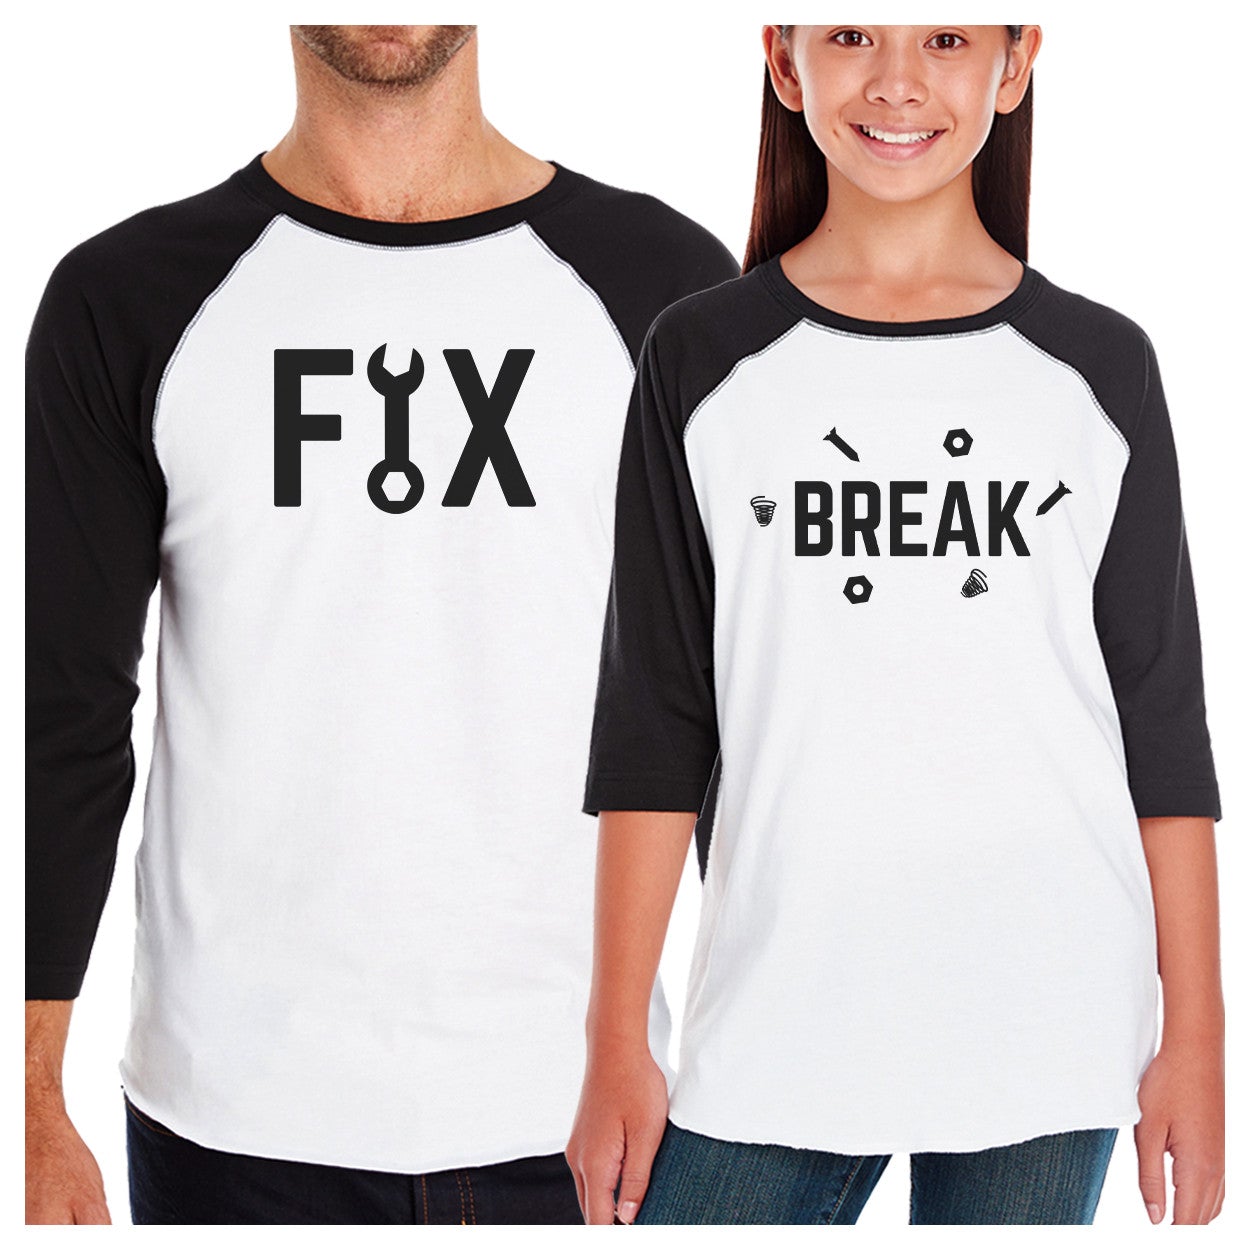 Fix And Break Funny Design Graphic T-Shirt Dad Baby Matching Tops - 365 In Love